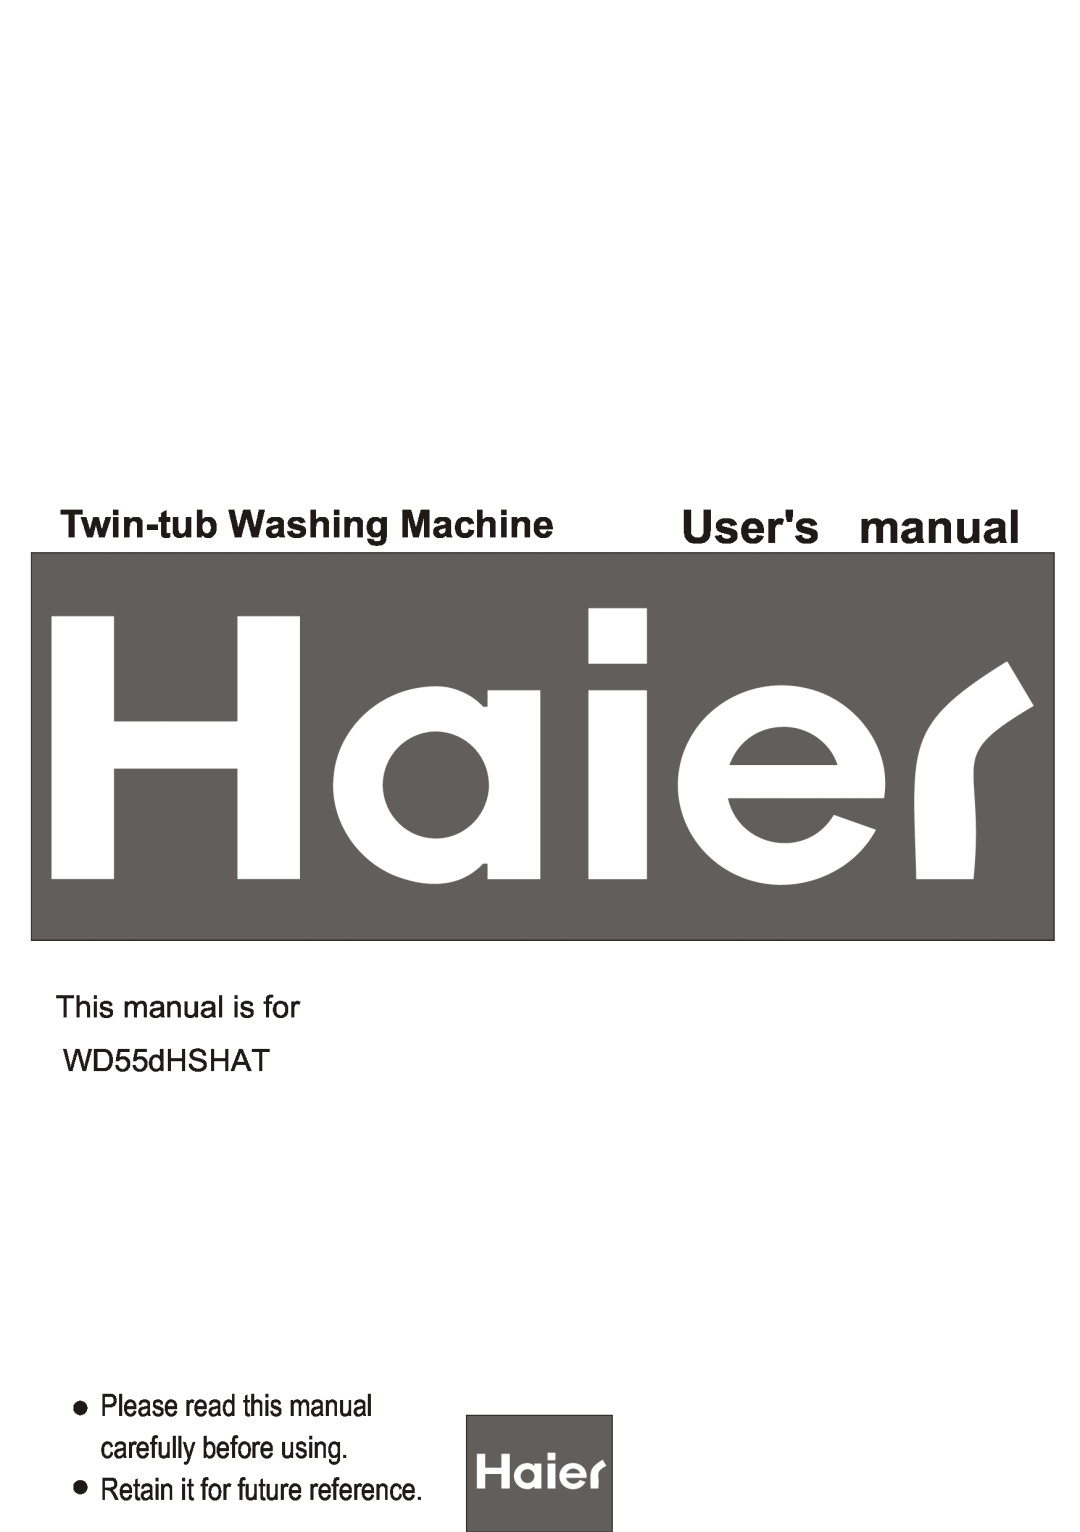 Haier user manual Users manual, This manual is for WD55dHSHAT, Twin-tub Washing Machine 